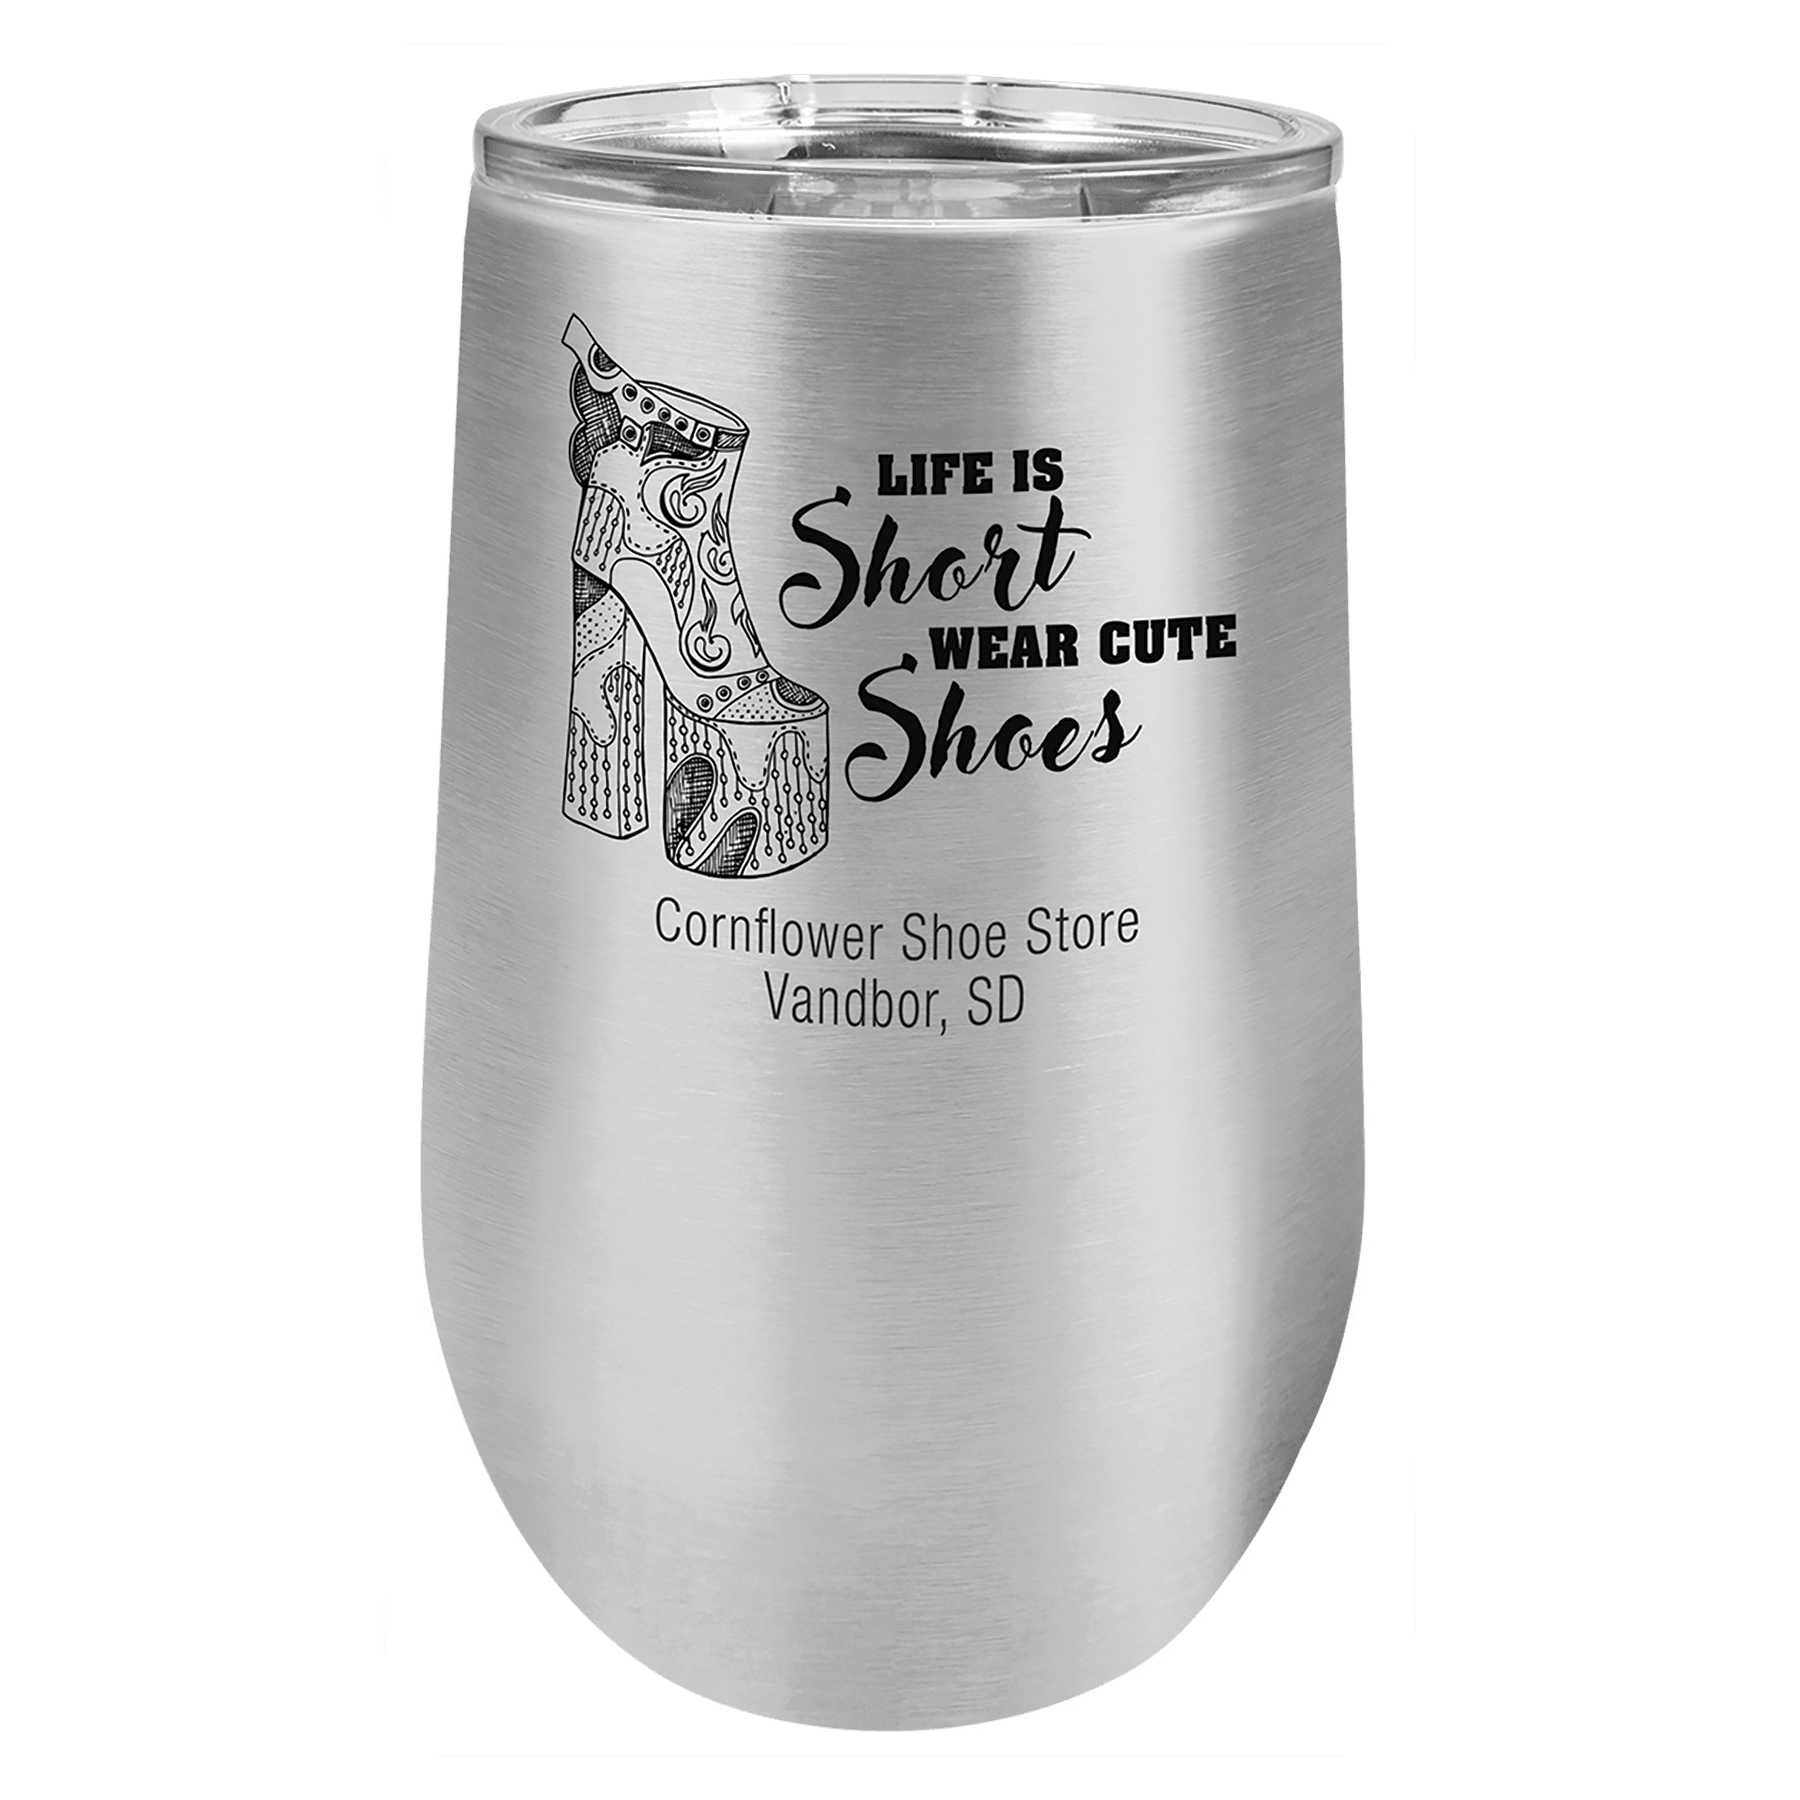 16 oz Vacuum Insulated Stemless Wine Tumbler with "Free Engraving"